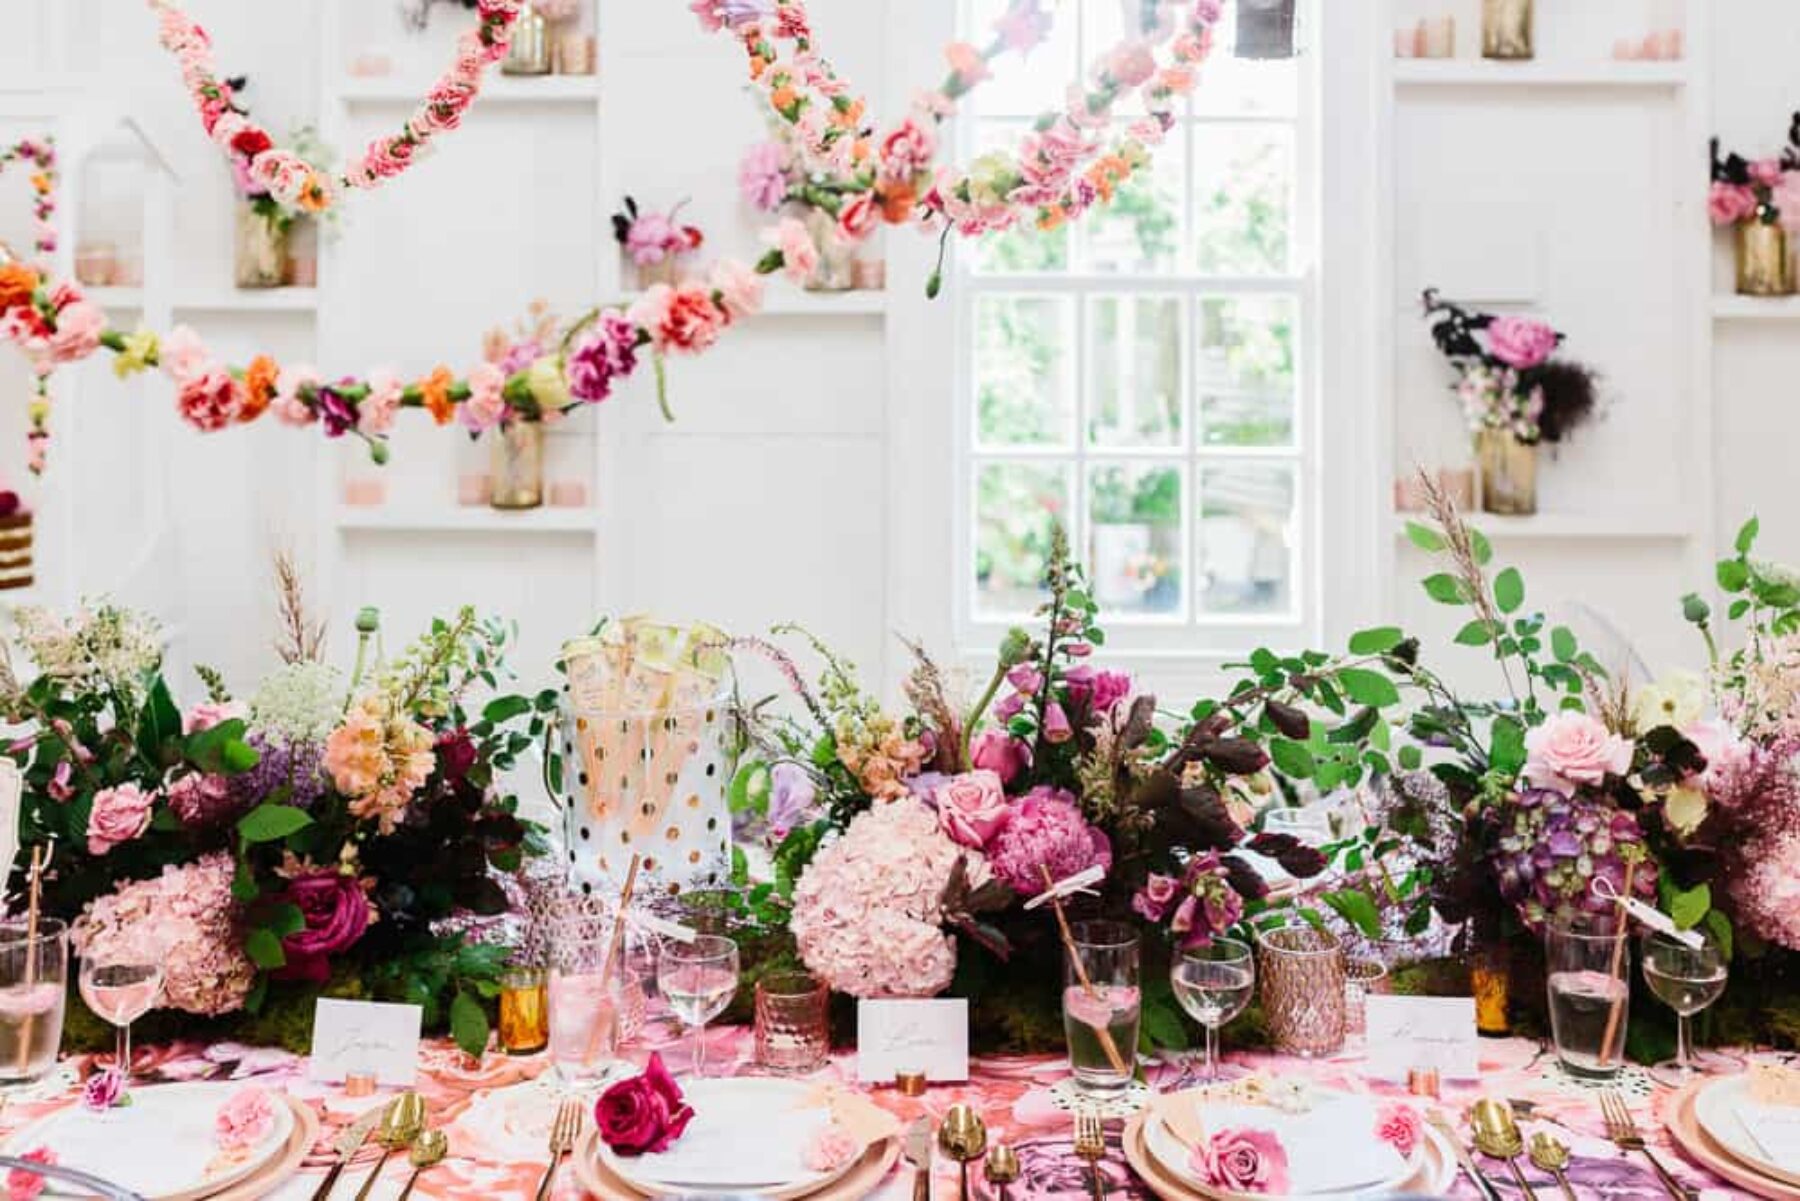 Floral tablescape with hanging floral garlands